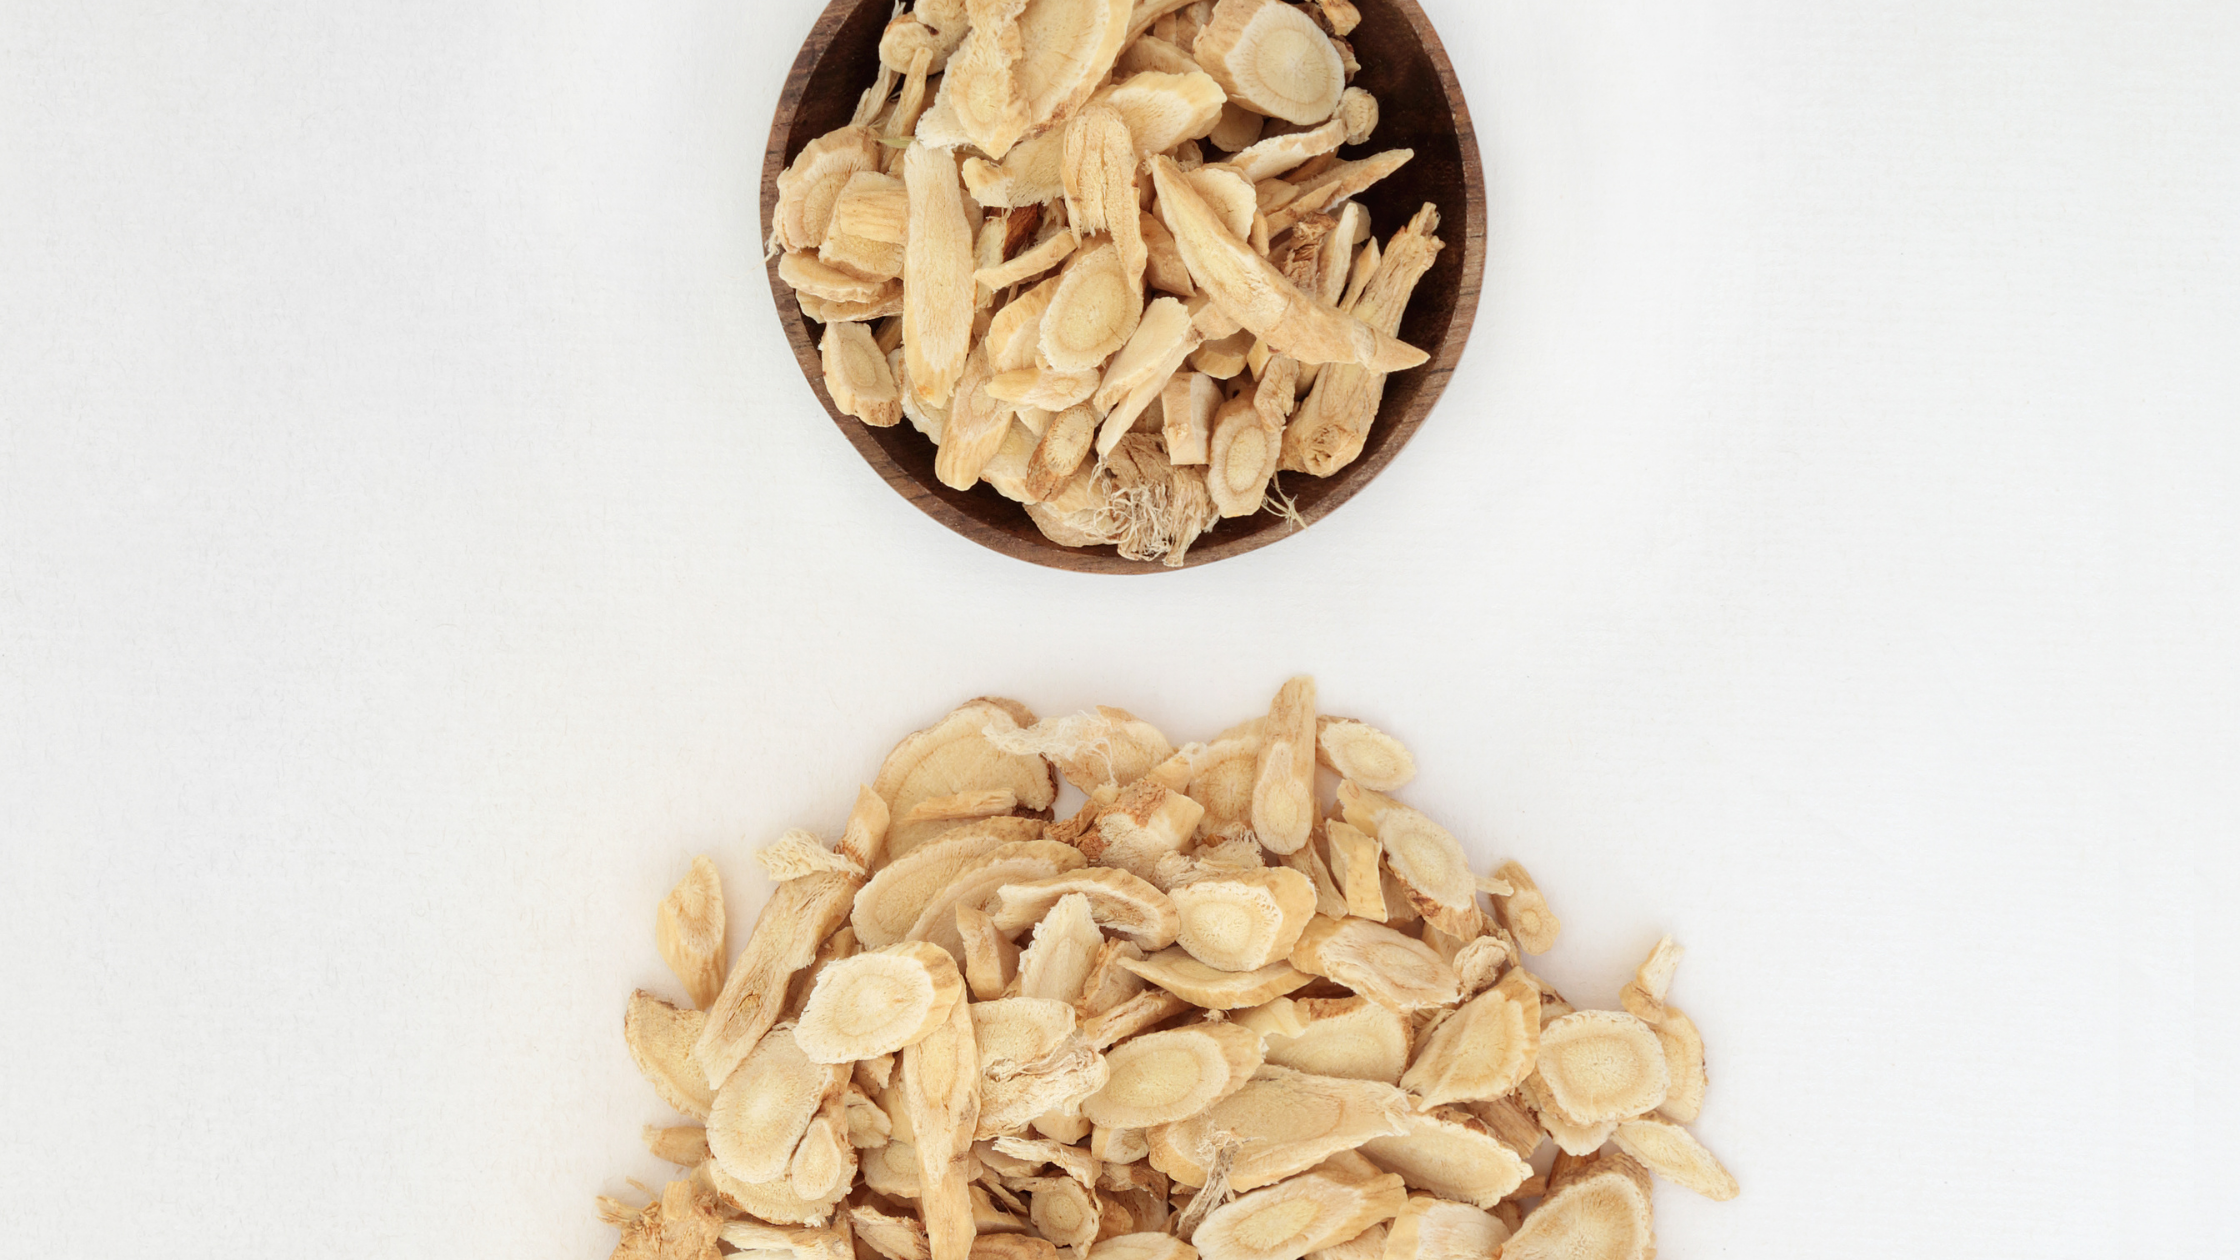 TCM Astragalus Root prepared for tonic